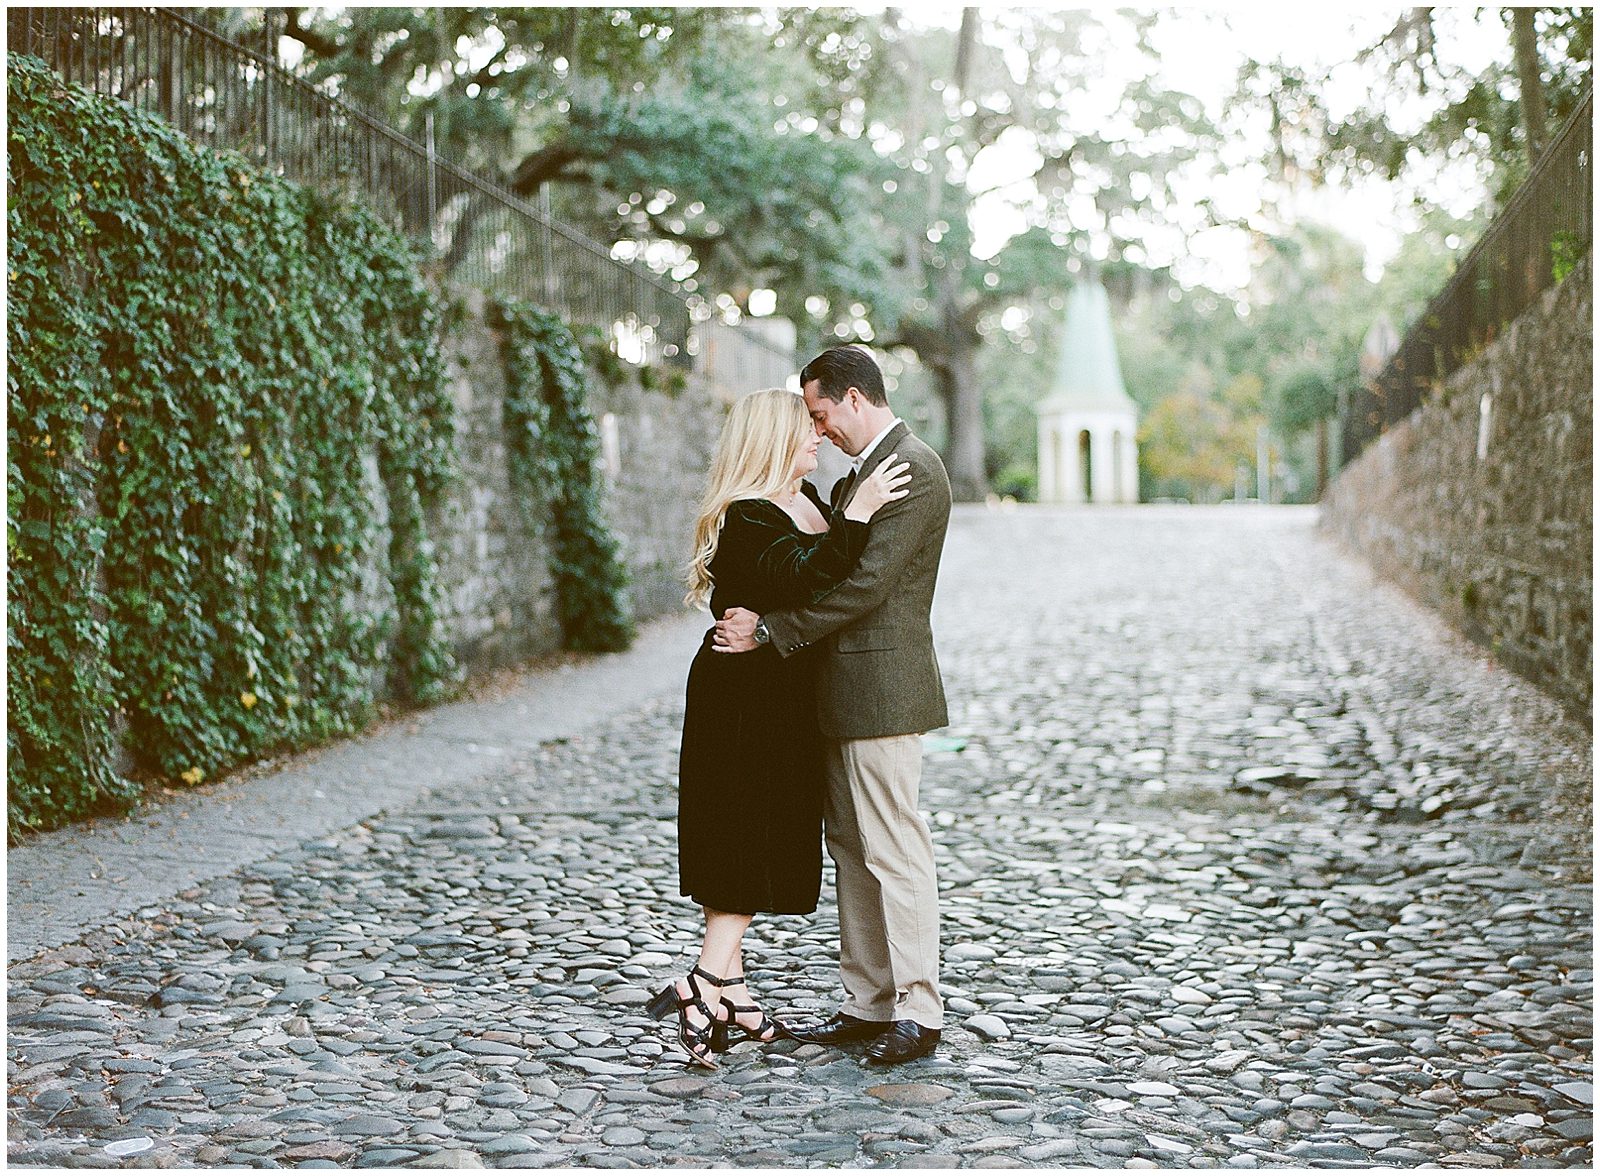 Fun Photo Locations In Savannah East Bay Street Engagement Session Photo